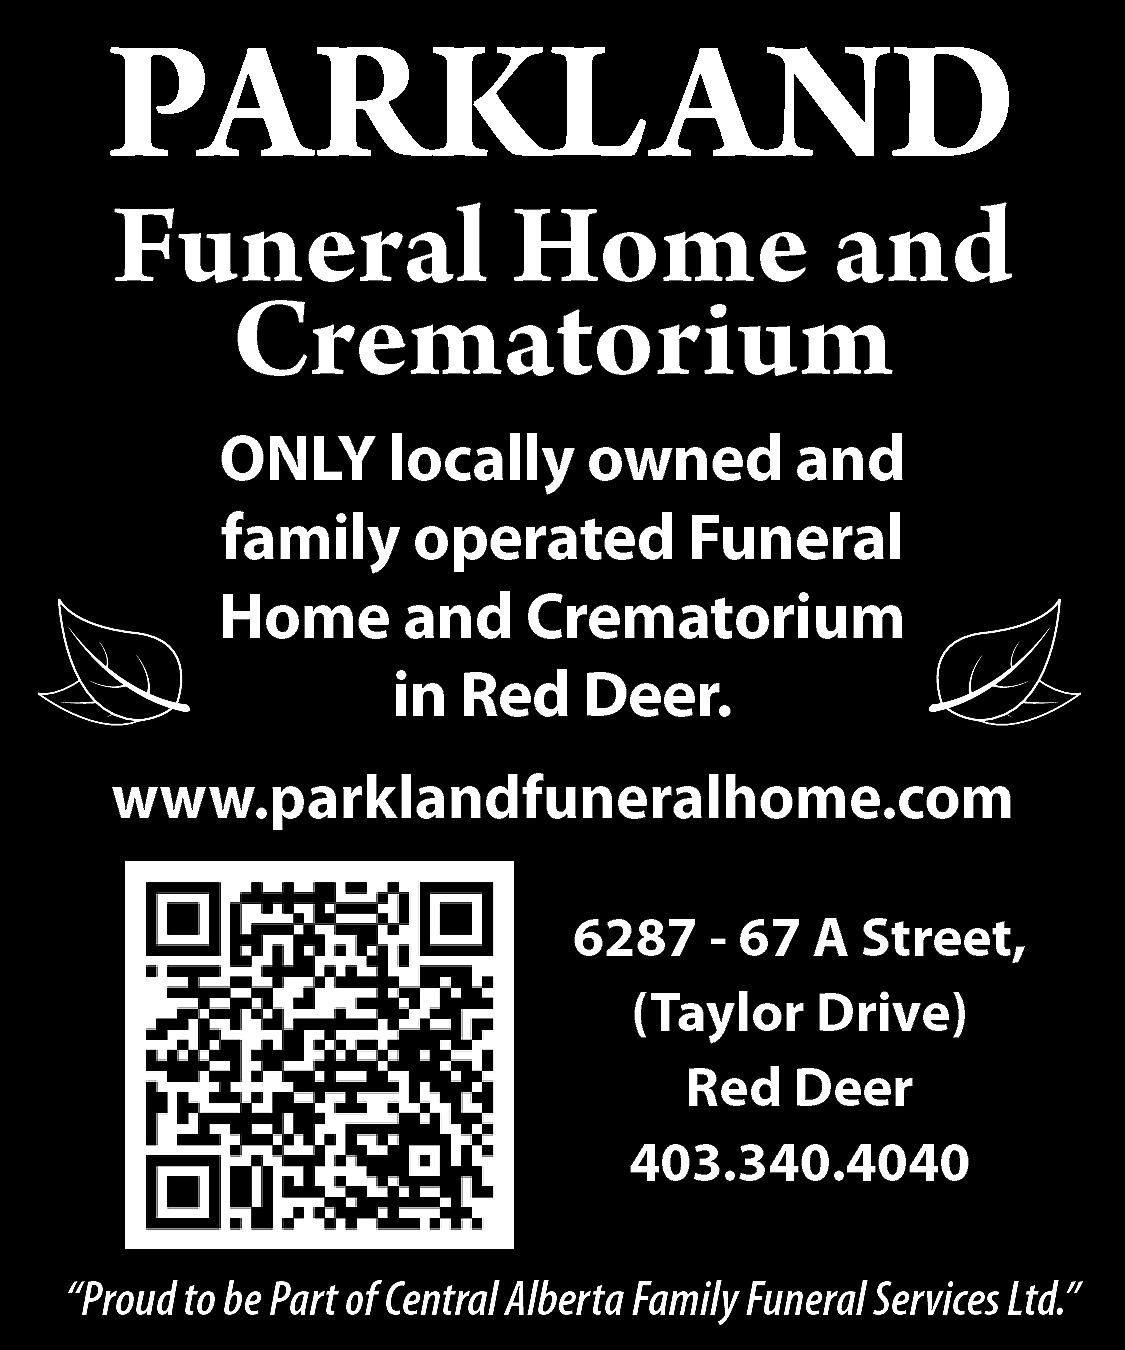 PARKLAND <br>PARKLAND <br>DNA LKRAP <br>Funeral  PARKLAND  PARKLAND  DNA LKRAP  Funeral Home and  Crematorium    Funeral  muirotaHome  merC d  and  na eCrematorium  moH larenuF  ONLY  detarelocally  po dnaowned  denwoand  yllaoperated  col YLNO  ONLY locally owned and  funeral  muirfamily  otahome  meoperated  rCand  dnaCrematorium  eFuneral  moh larenuf  ”and  reRed  eDCrematorium  d  Deer”  eR ni  Homein  in Red Deer.    403.340.4040  0404.043.304    www.parklandfuneralhome.com  www.parklandfuneralhome.com  moc.emohlarenufdnalkrap.www  r6287  eeD de-R 67  ,)eviA  rDStreet,  rolyaT( ,(Taylor  teertSDrive),  A 76 Red  - 78Deer  26    6287 - 67 A Street,  (Taylor Drive)  Red Deer  403.340.4040    “Proud to be Part of Central Alberta Family Funeral Services Ltd.”    